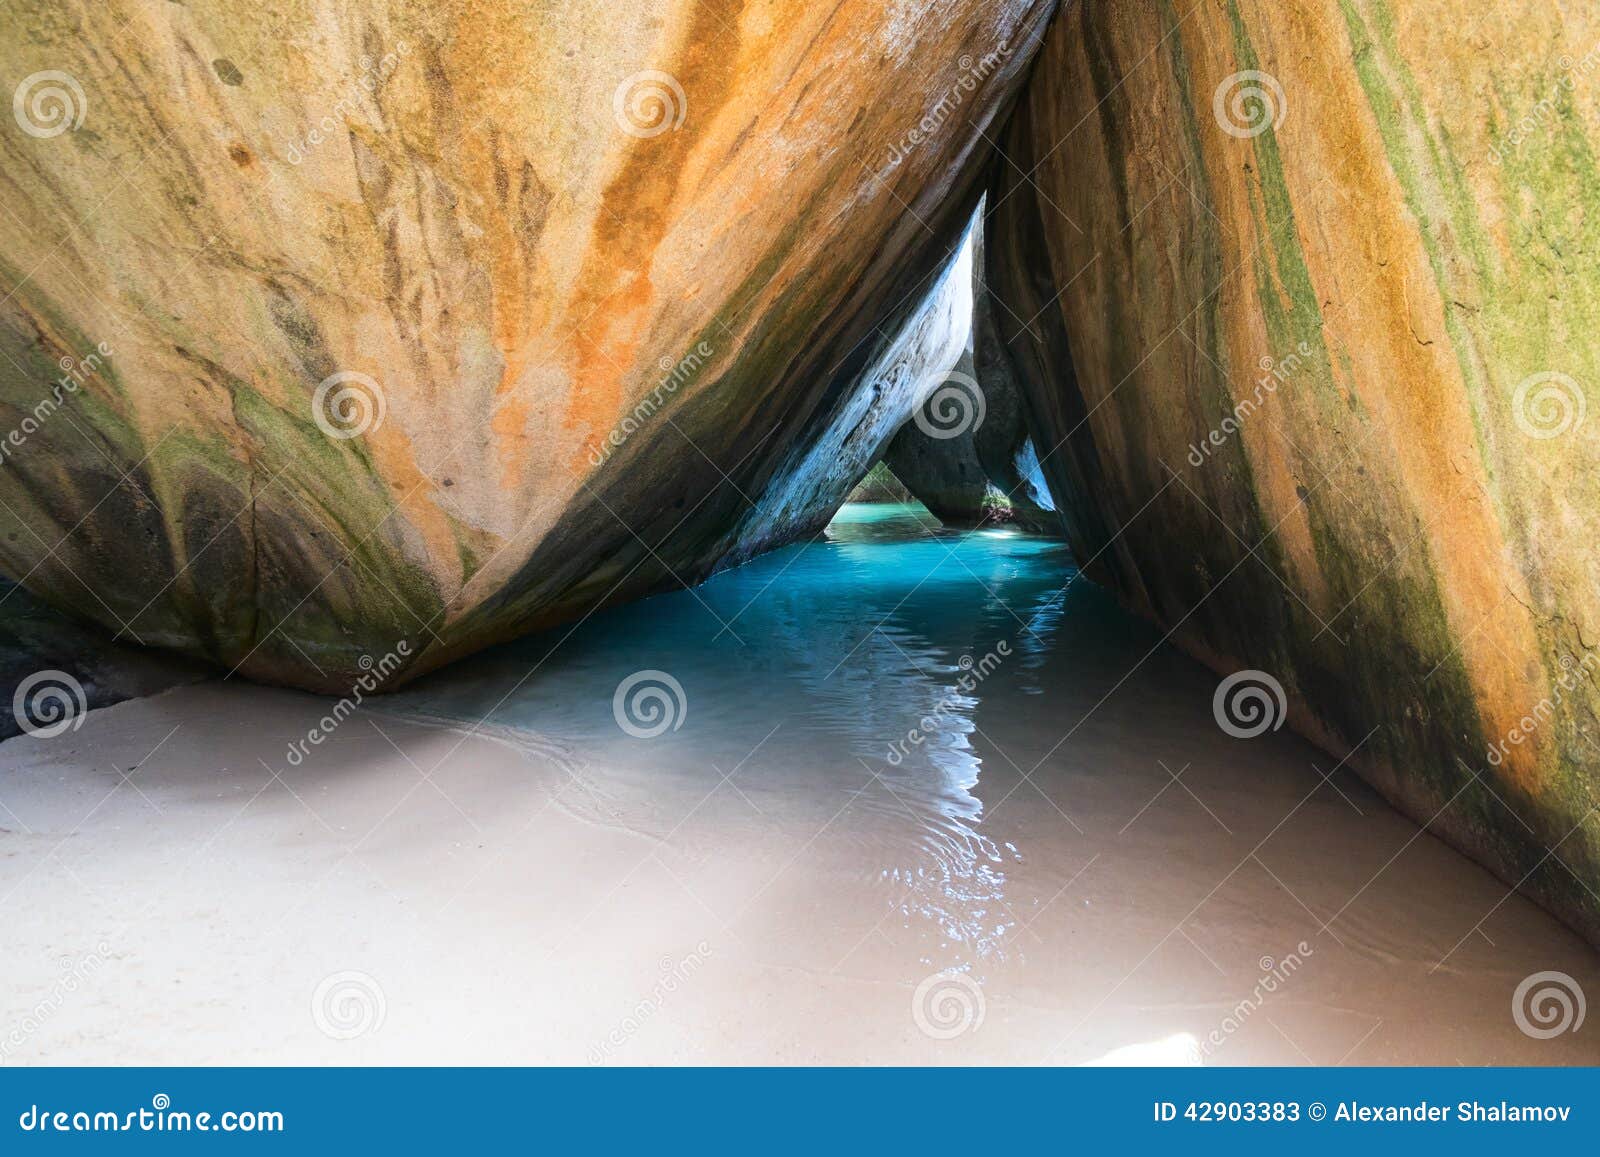 Cave At Tropical Beach Stock Image Image Of Landscape 42903383